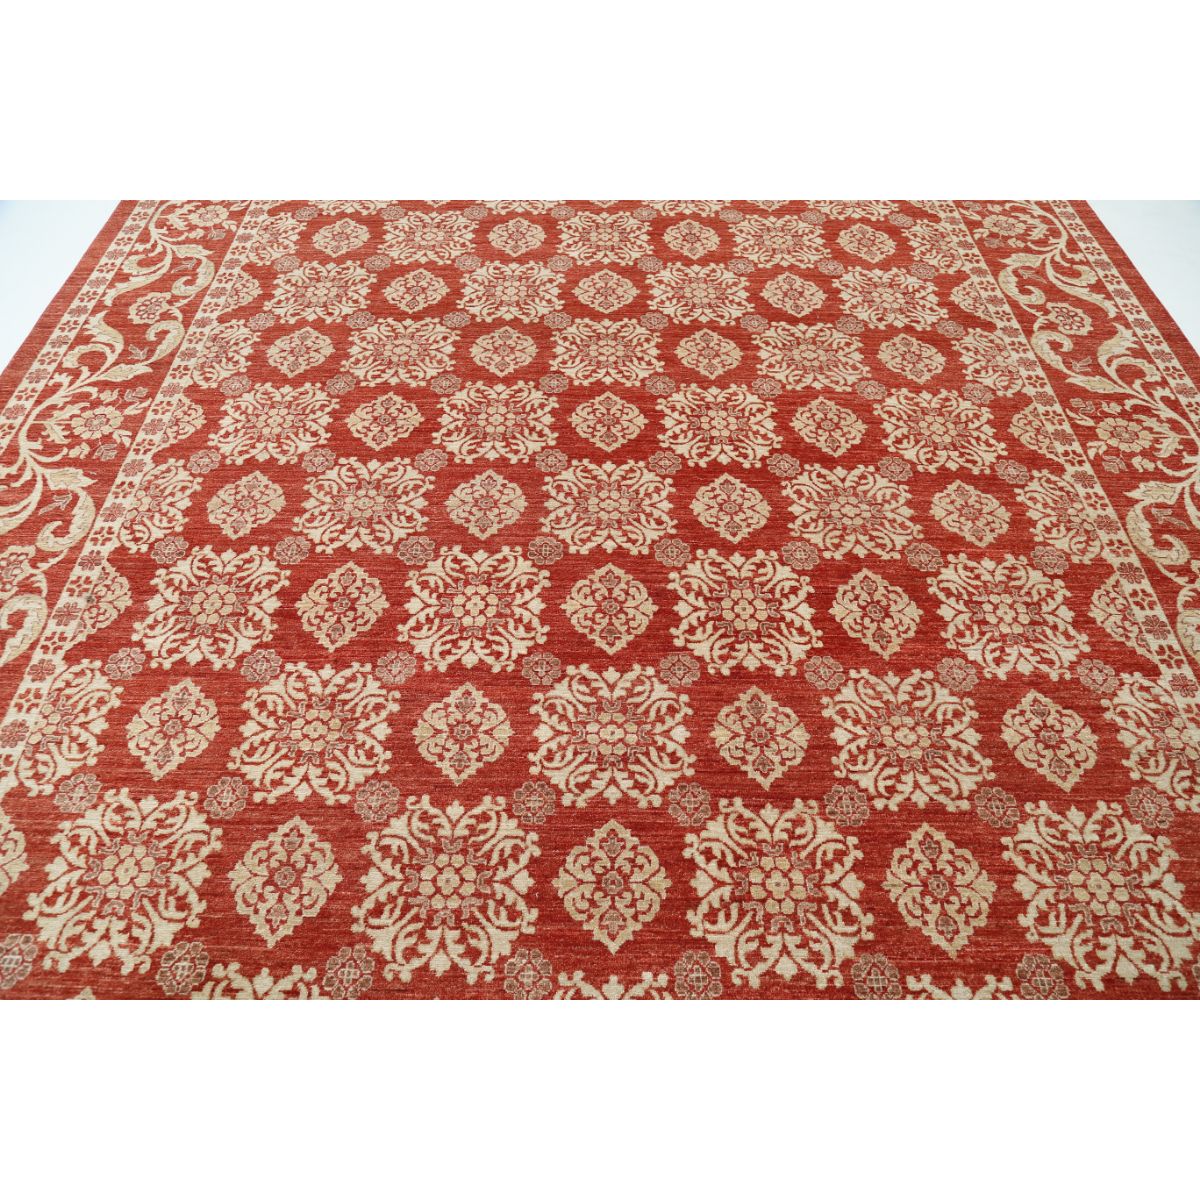 Ziegler 6'5" X 9'2" Wool Hand-Knotted Rug